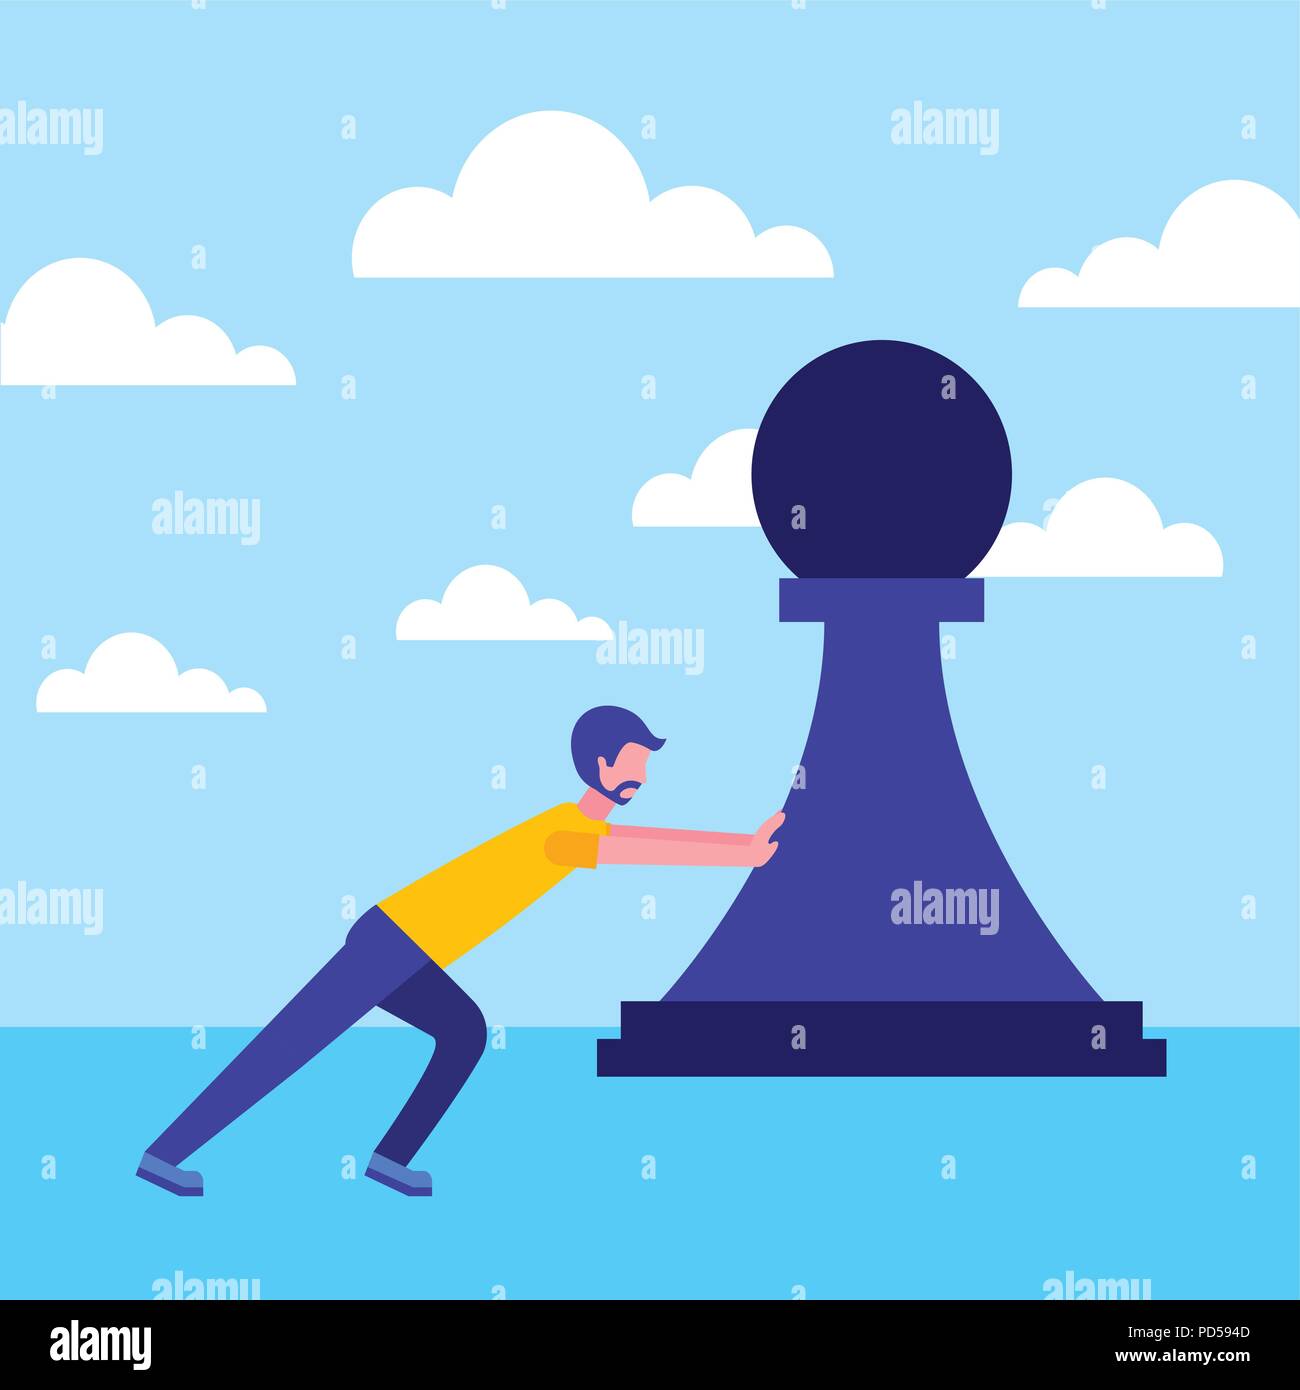 business people concept Stock Vector